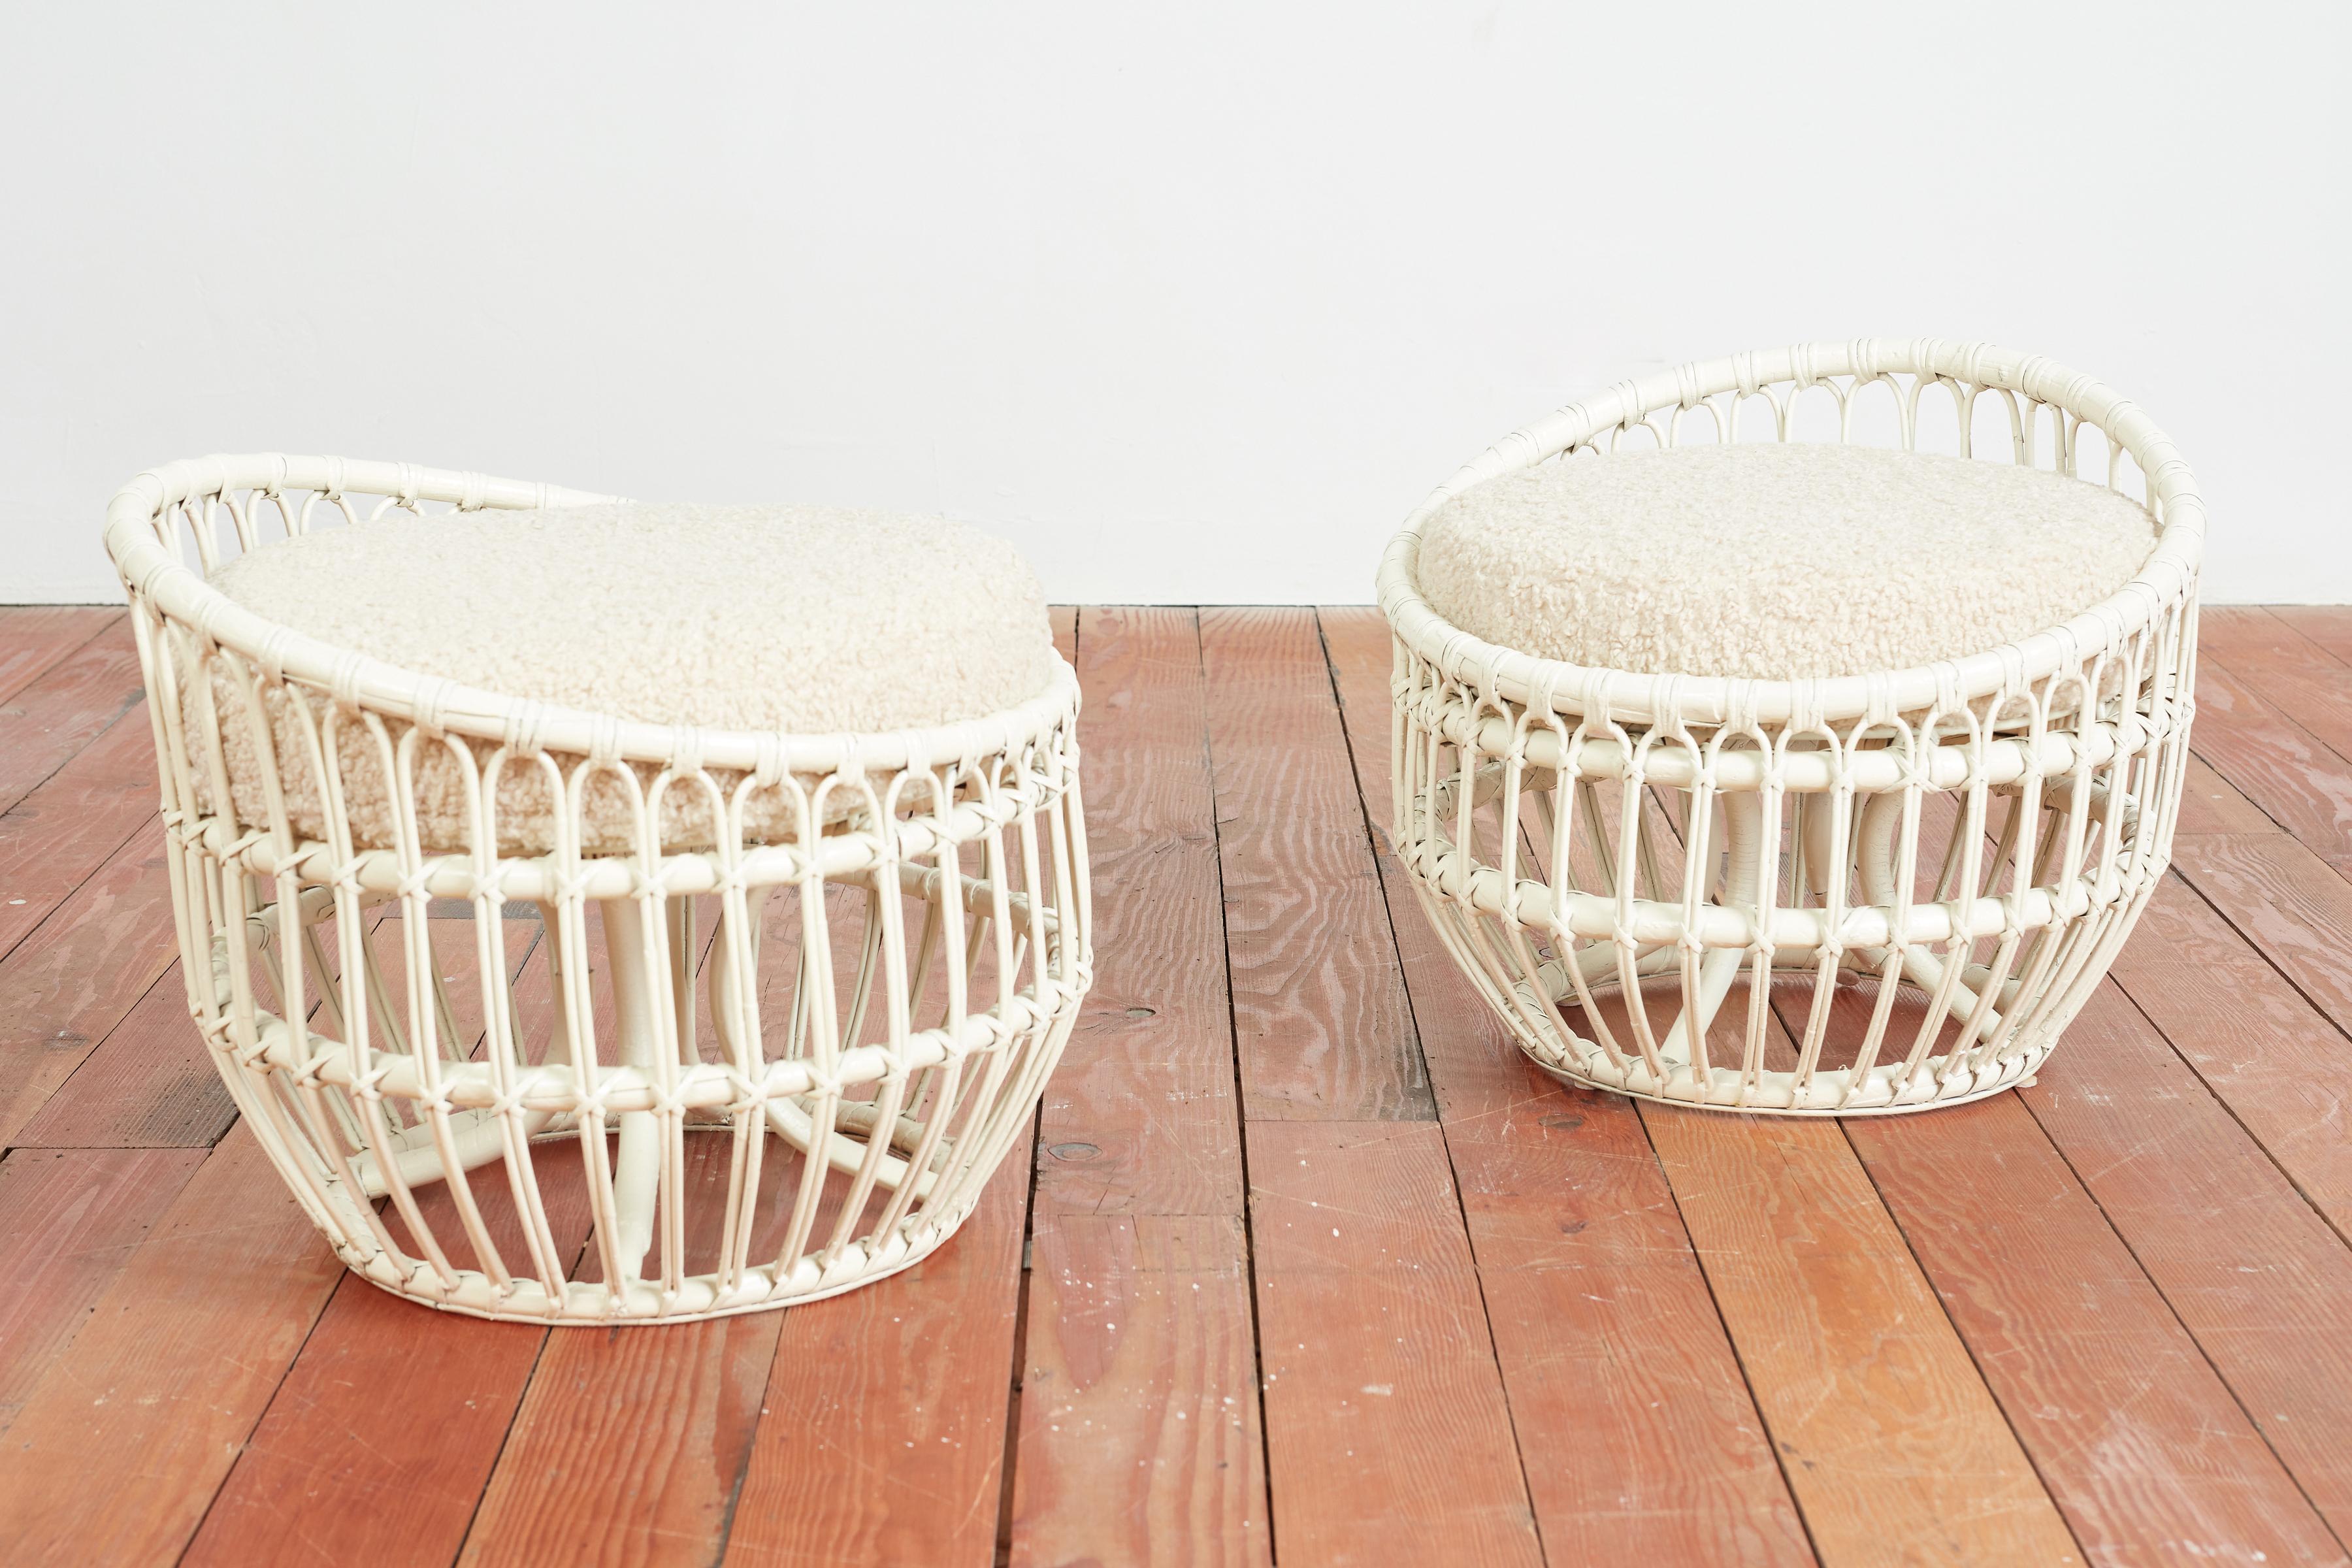 Unique shaped rattan ottoman/stools by Franco Albini
Italy, 1950s
Circular shaped with curved rattan - newly lacquered white with new creamy boucle upholstered seat cushions 
Sold as a pair 